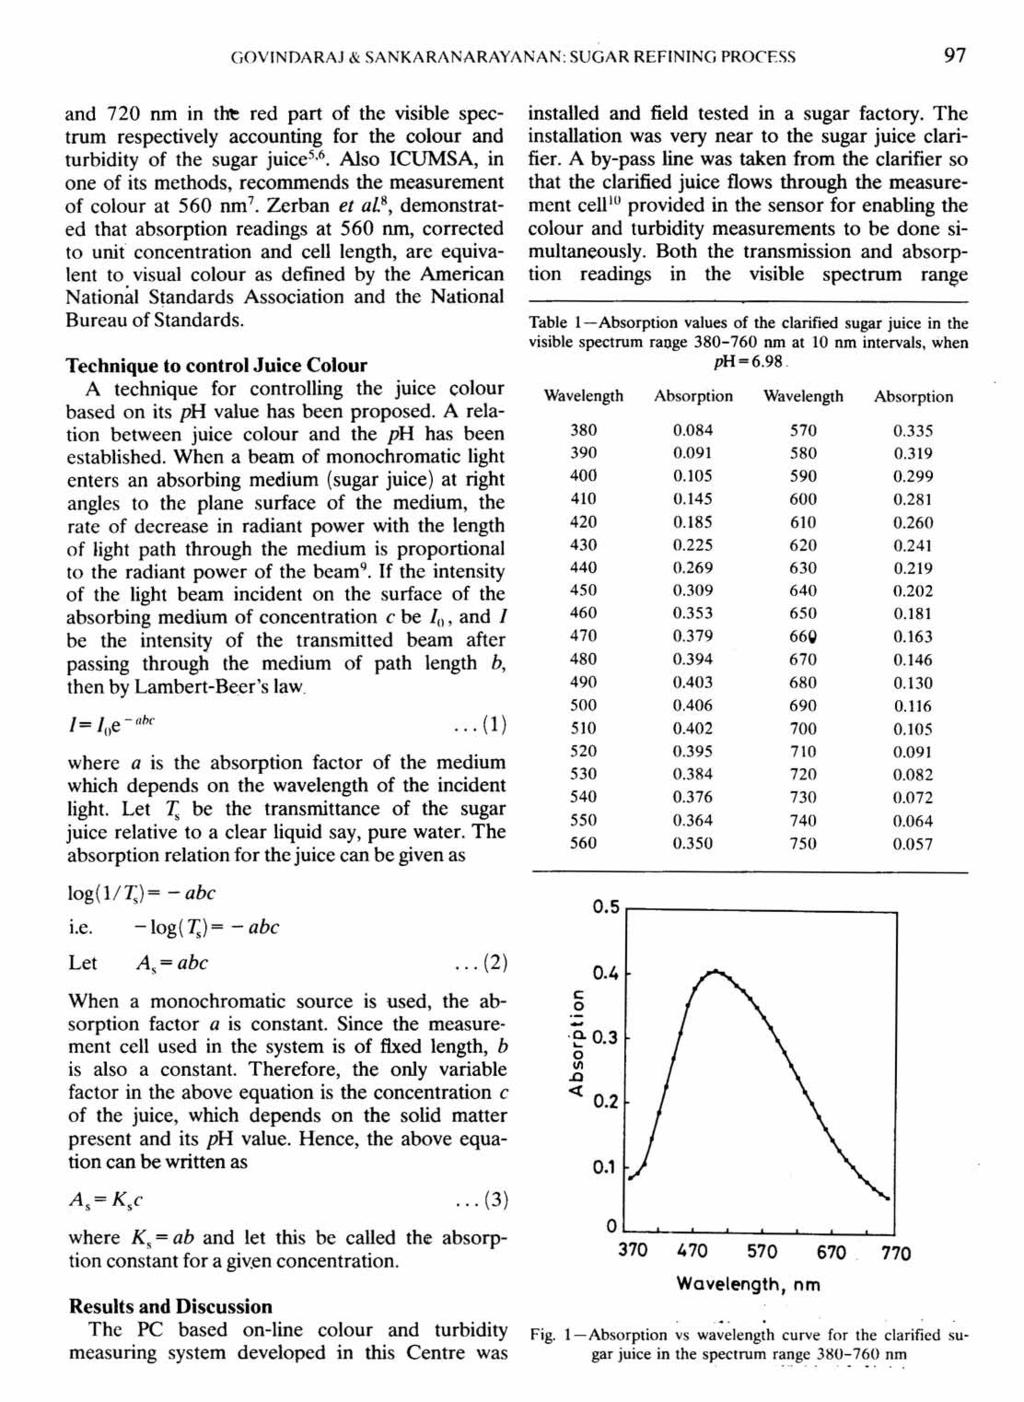 GOVINDARAJ & SANKARANARAYANAN: SUGAR REFINING PROCESS 97 and 720 nm in t~ red part f the visible spectrum respectively accunting fr the clur and turbidity f the sugar juice-", Als ICUMSA, in ne f its